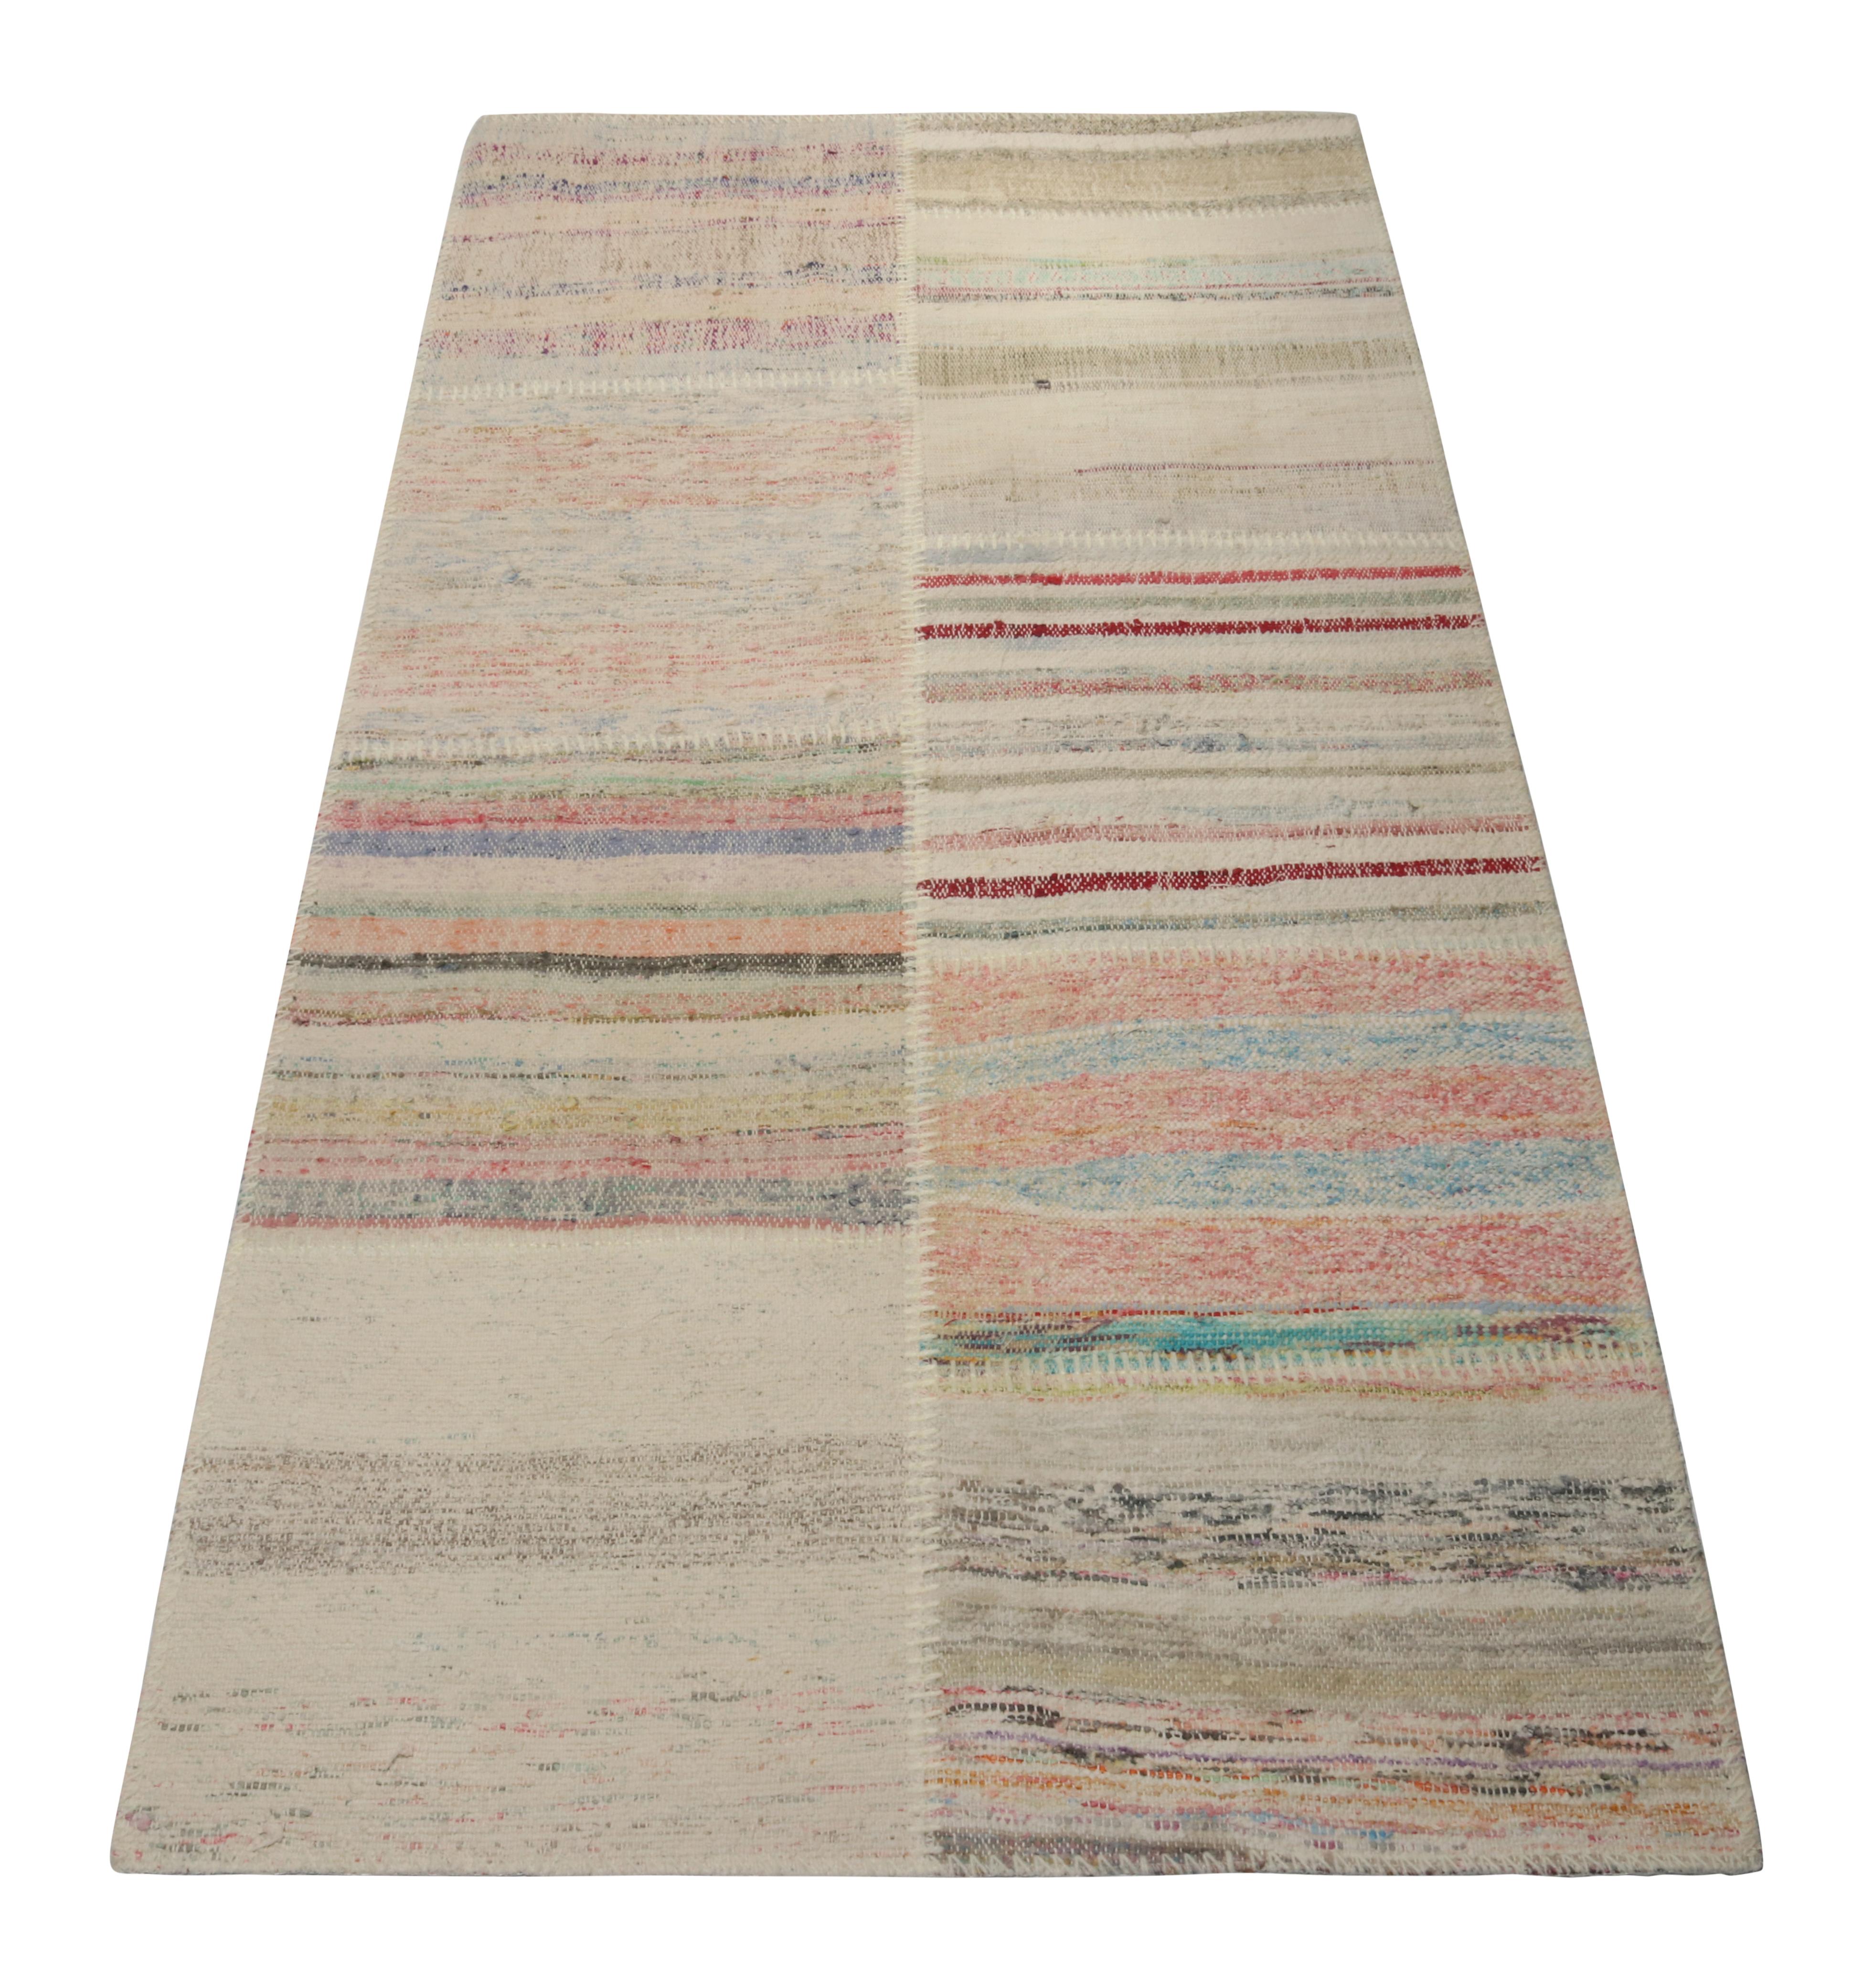 Handwoven in wool, Rug & Kilim presents a 3x6 contemporary runner from their innovative new patchwork kilim collection. 

On the Design: 

This flat weave technique repurposes vintage yarns in polychromatic stripes and striae, achieving a playful